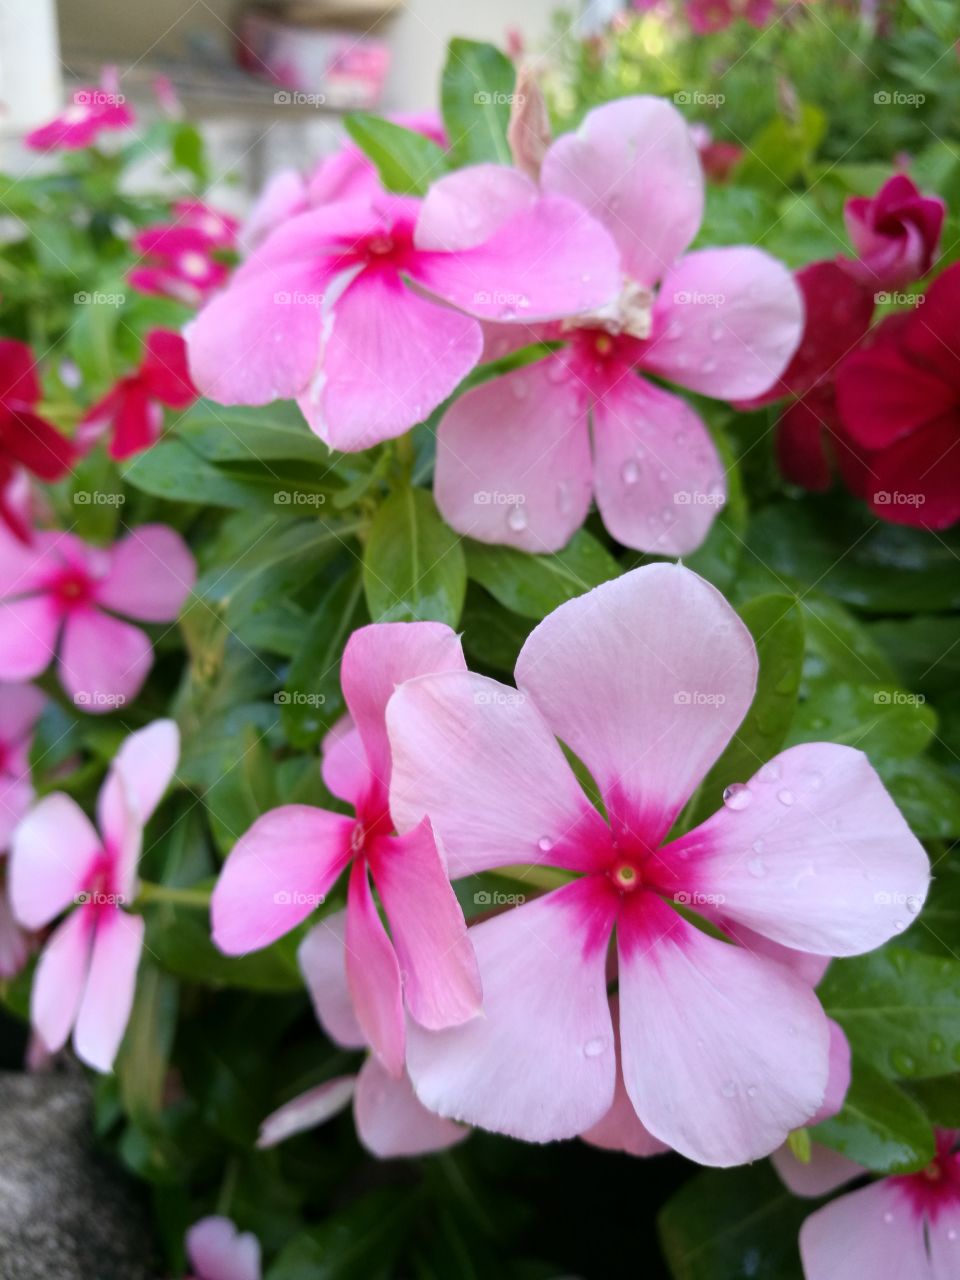 Periwinkle flowers with pink color bloom in garden.